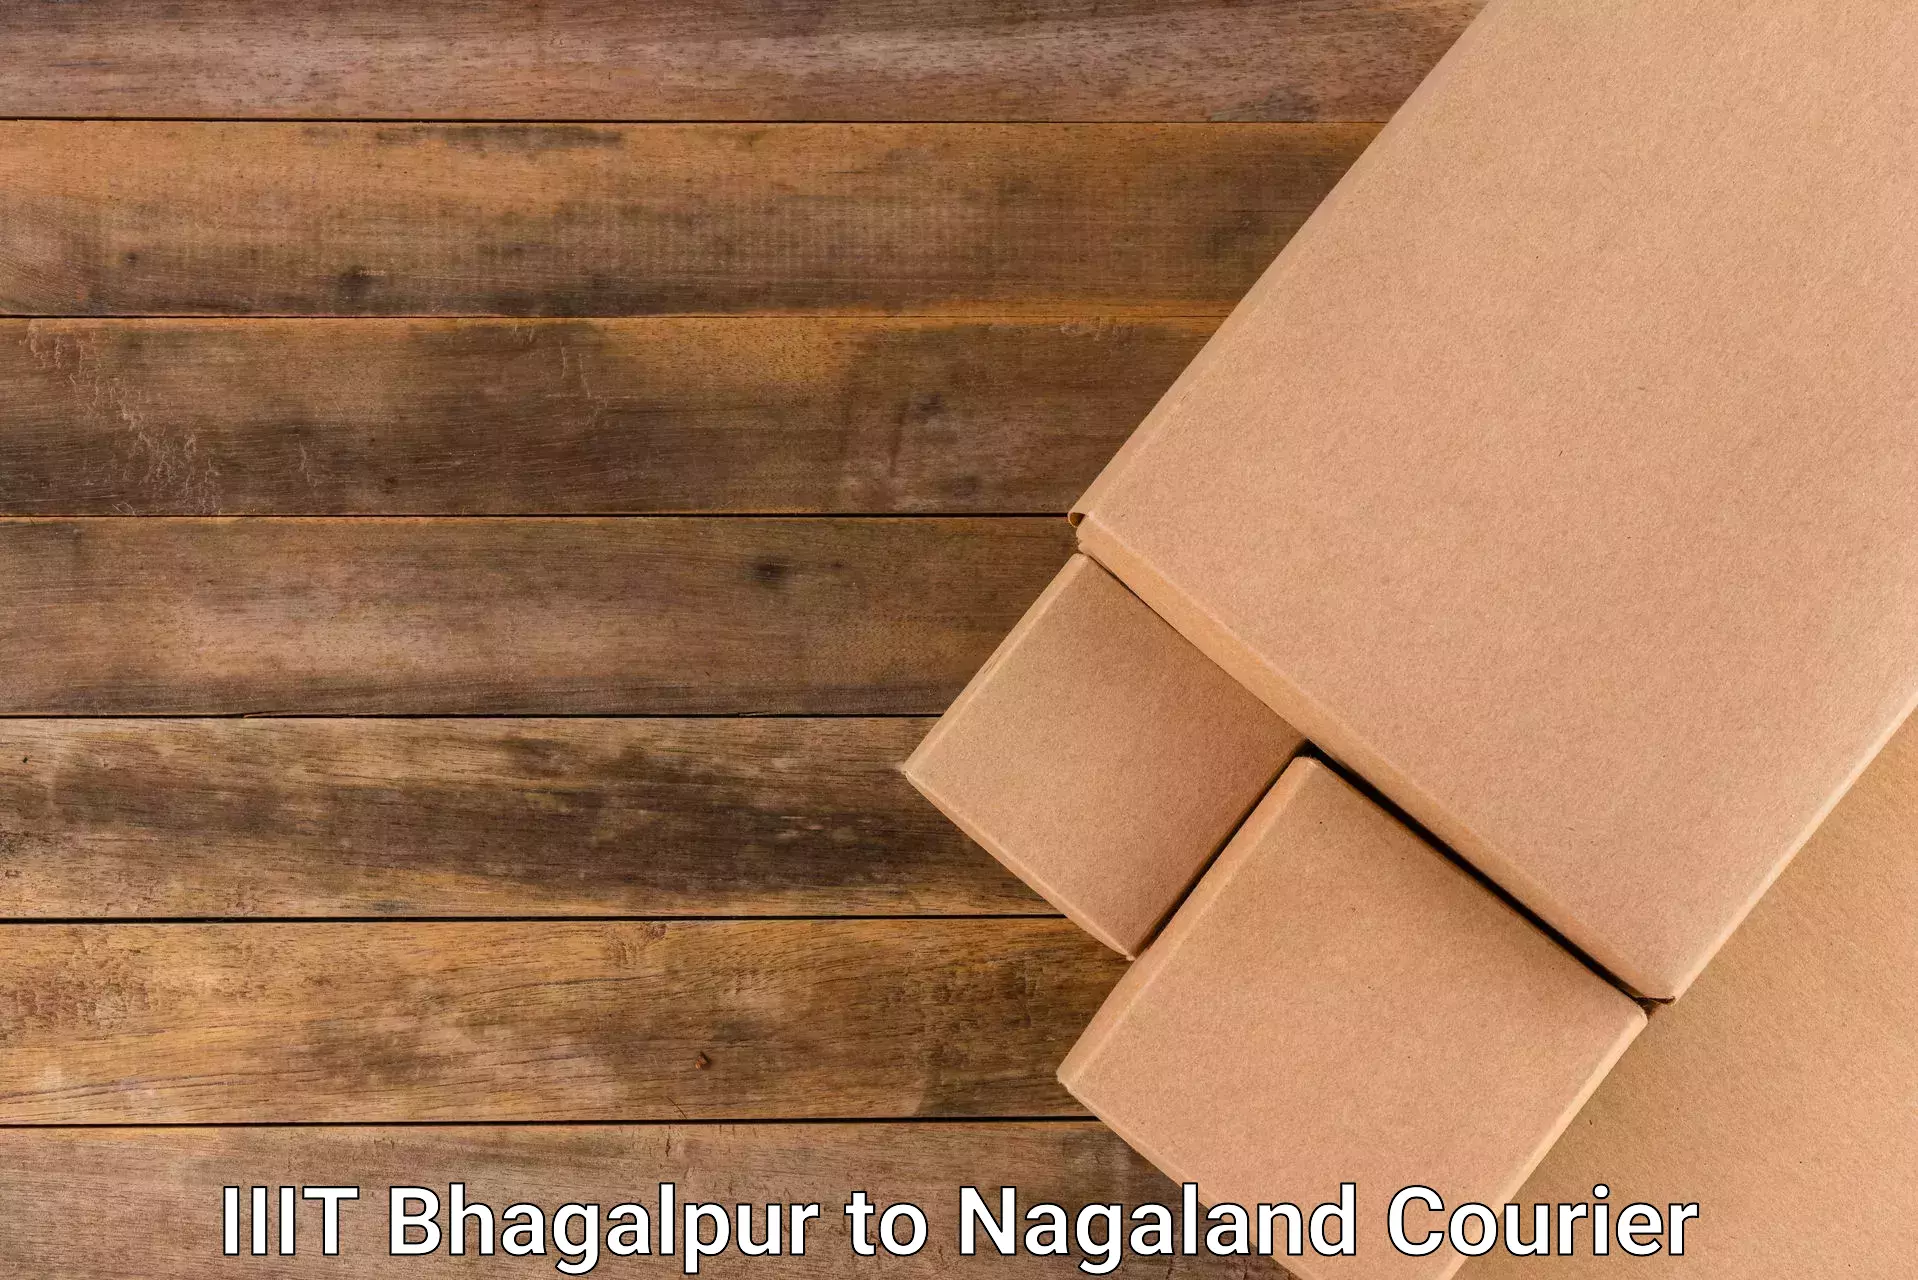 Sustainable courier practices IIIT Bhagalpur to Nagaland